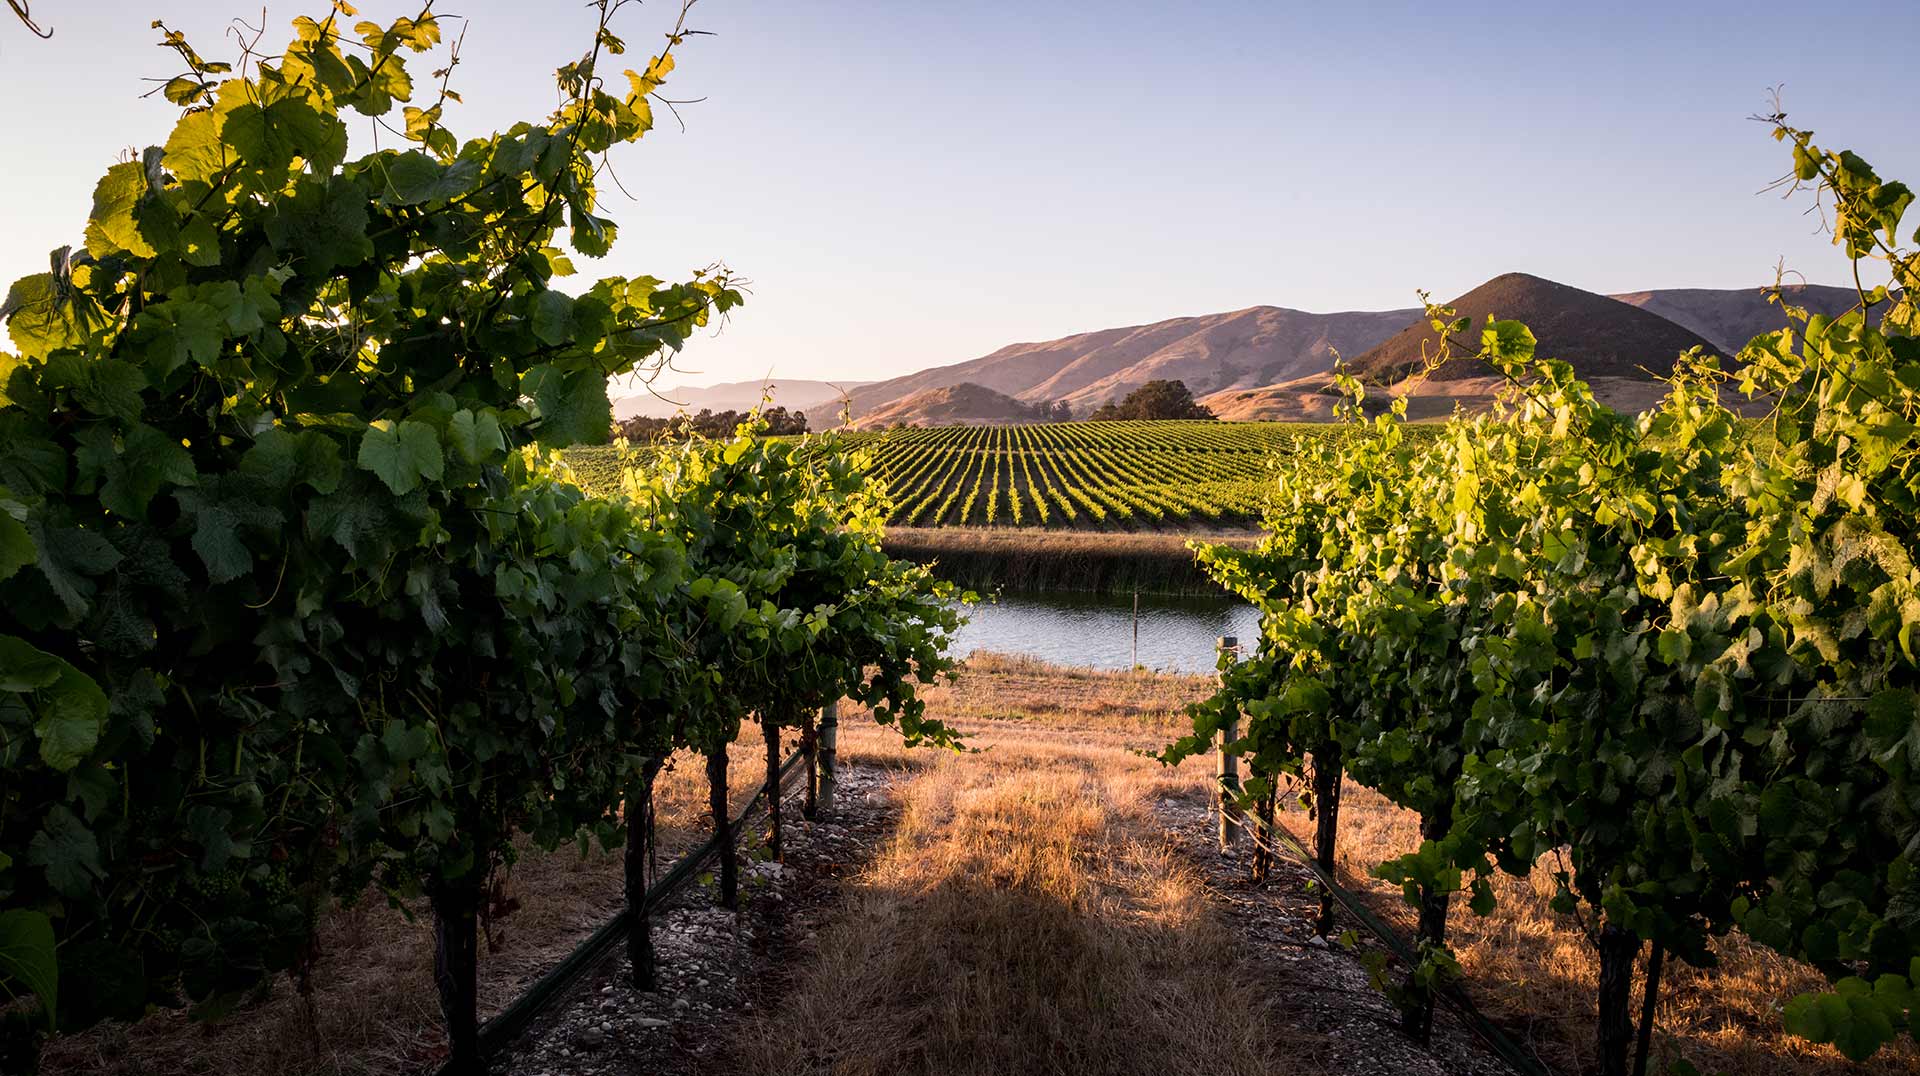 View through a vineyard aisle to the irrigation pond at sunset